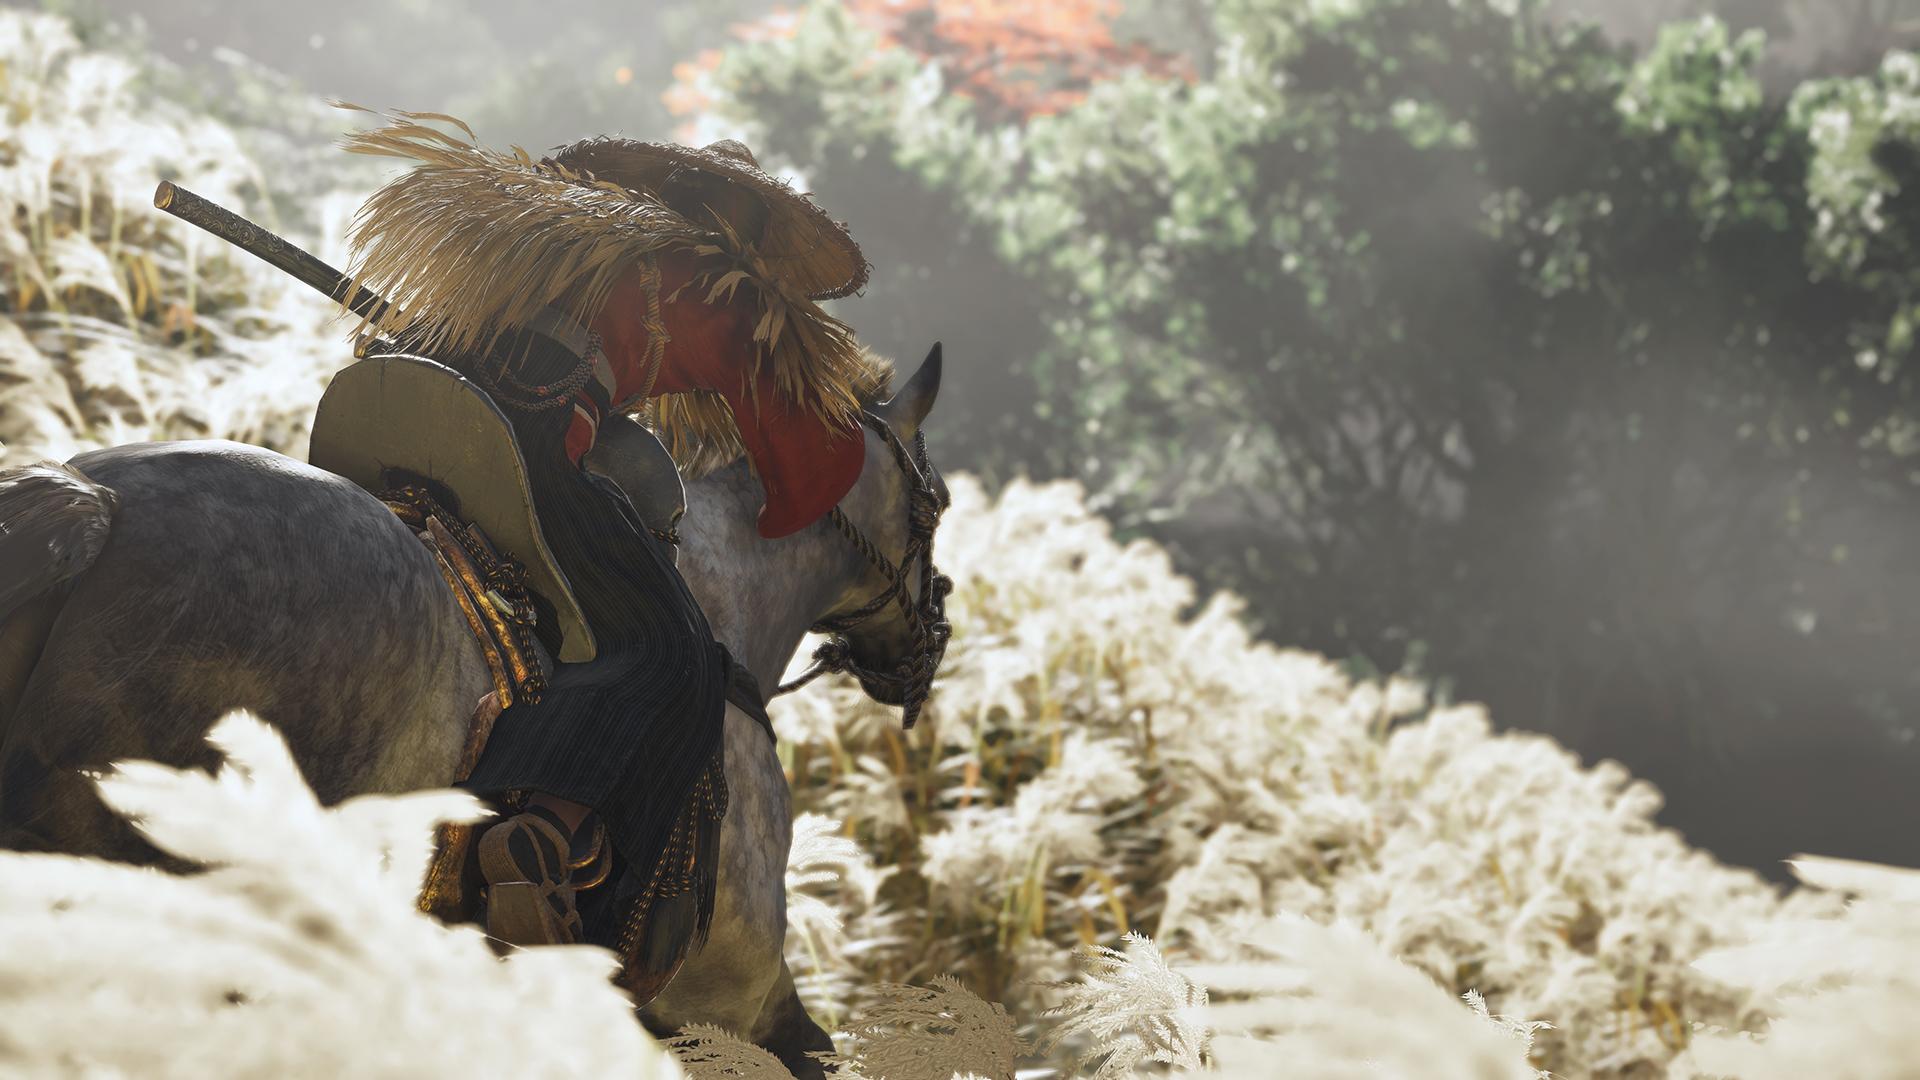 Sucker Punch Staffing Up for What Sounds Like Ghost of Tsushima 2